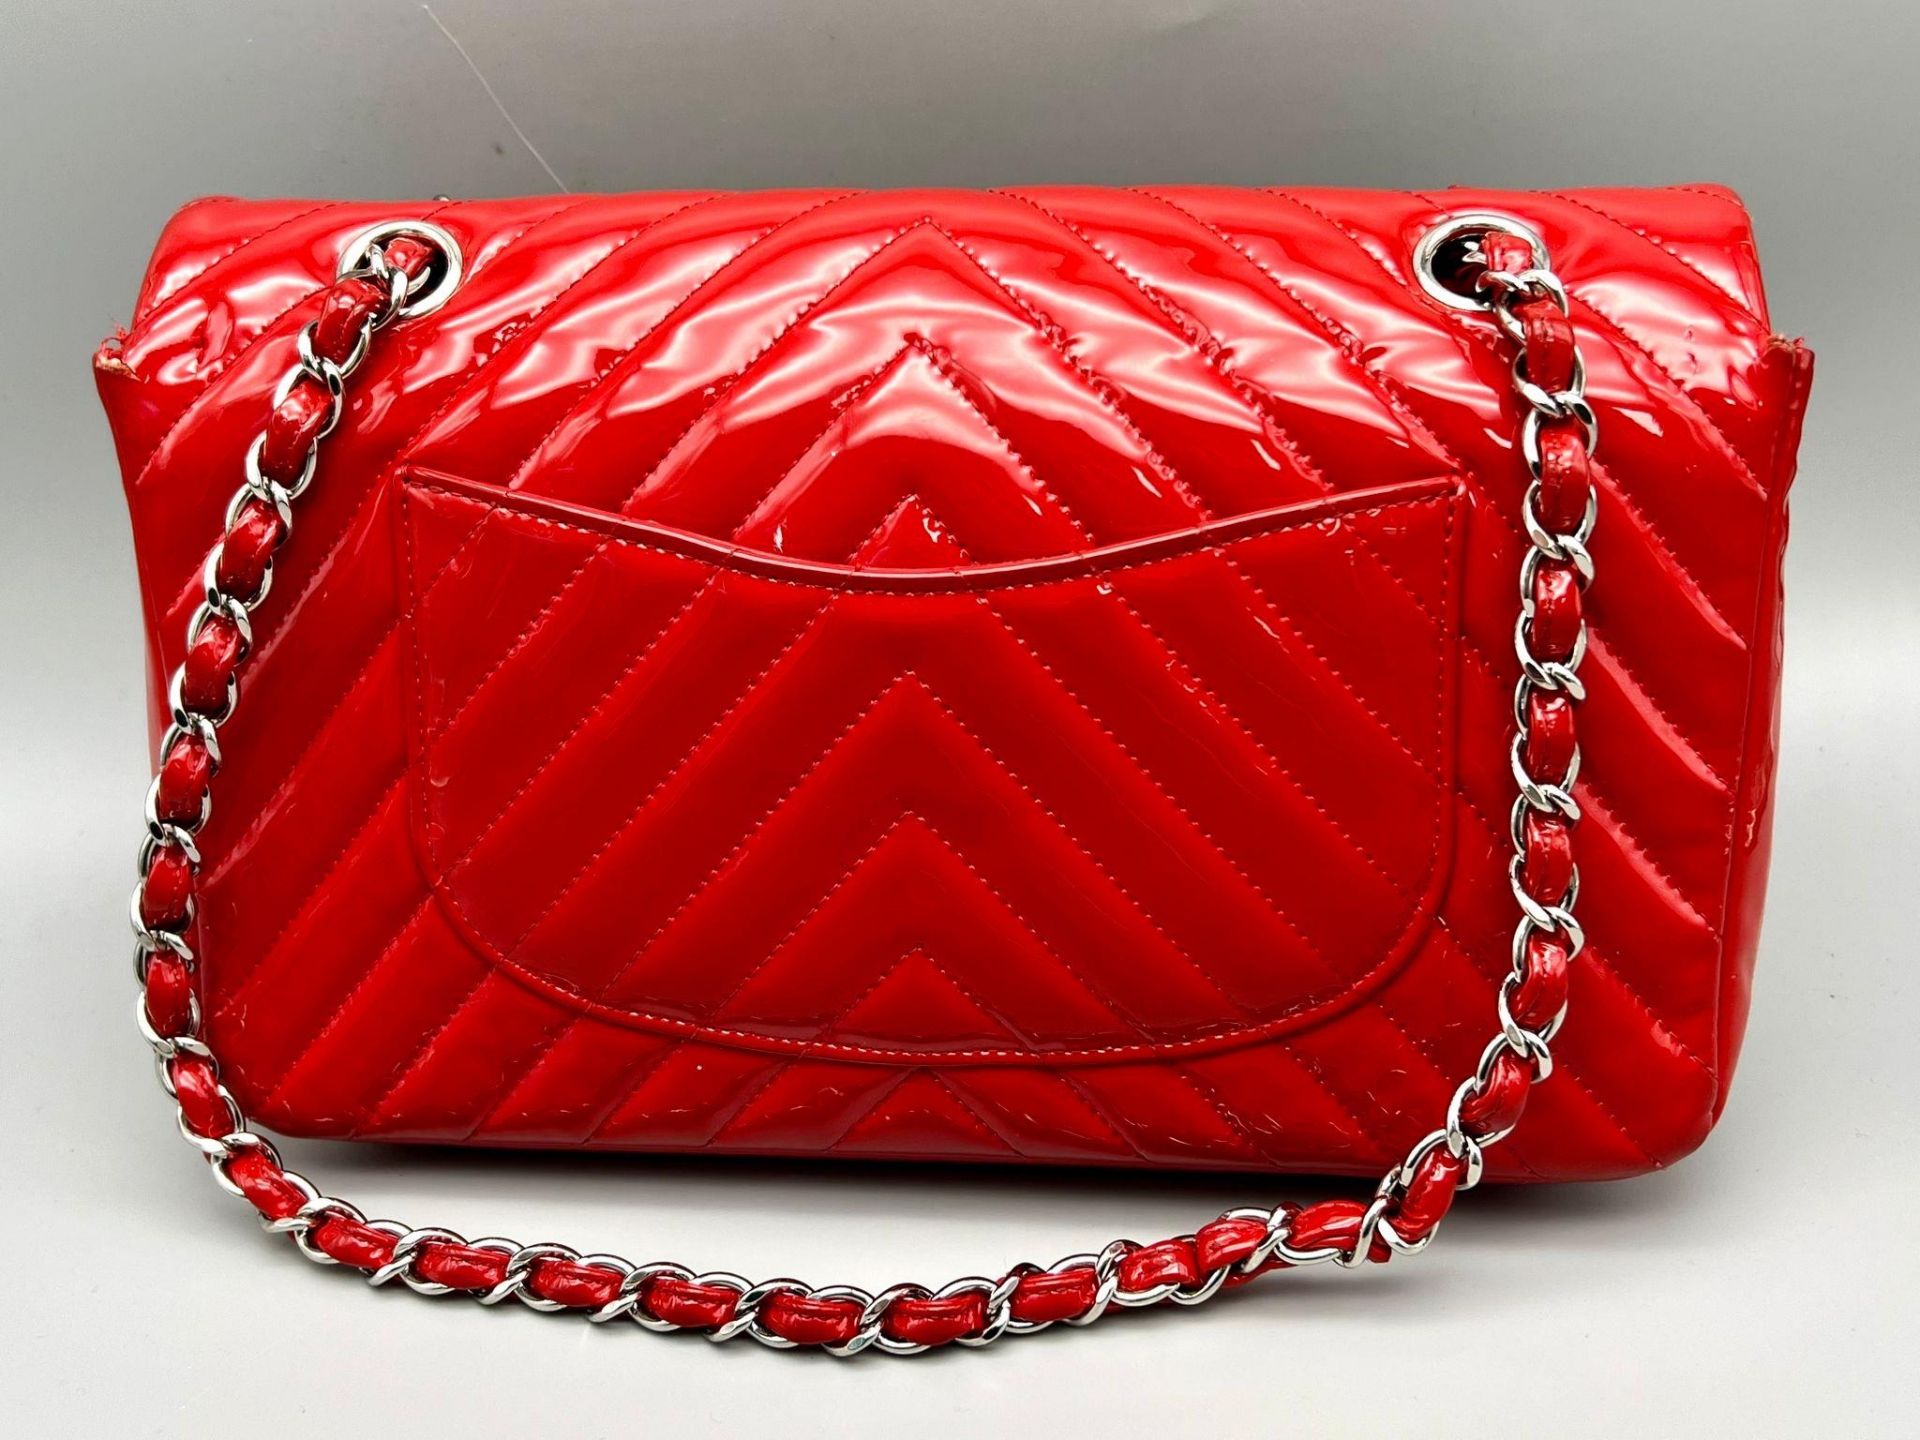 A Chanel Patent Leather Flap Handbag. Bright red patent leather quilted exterior. Classic Chanel - Bild 3 aus 7